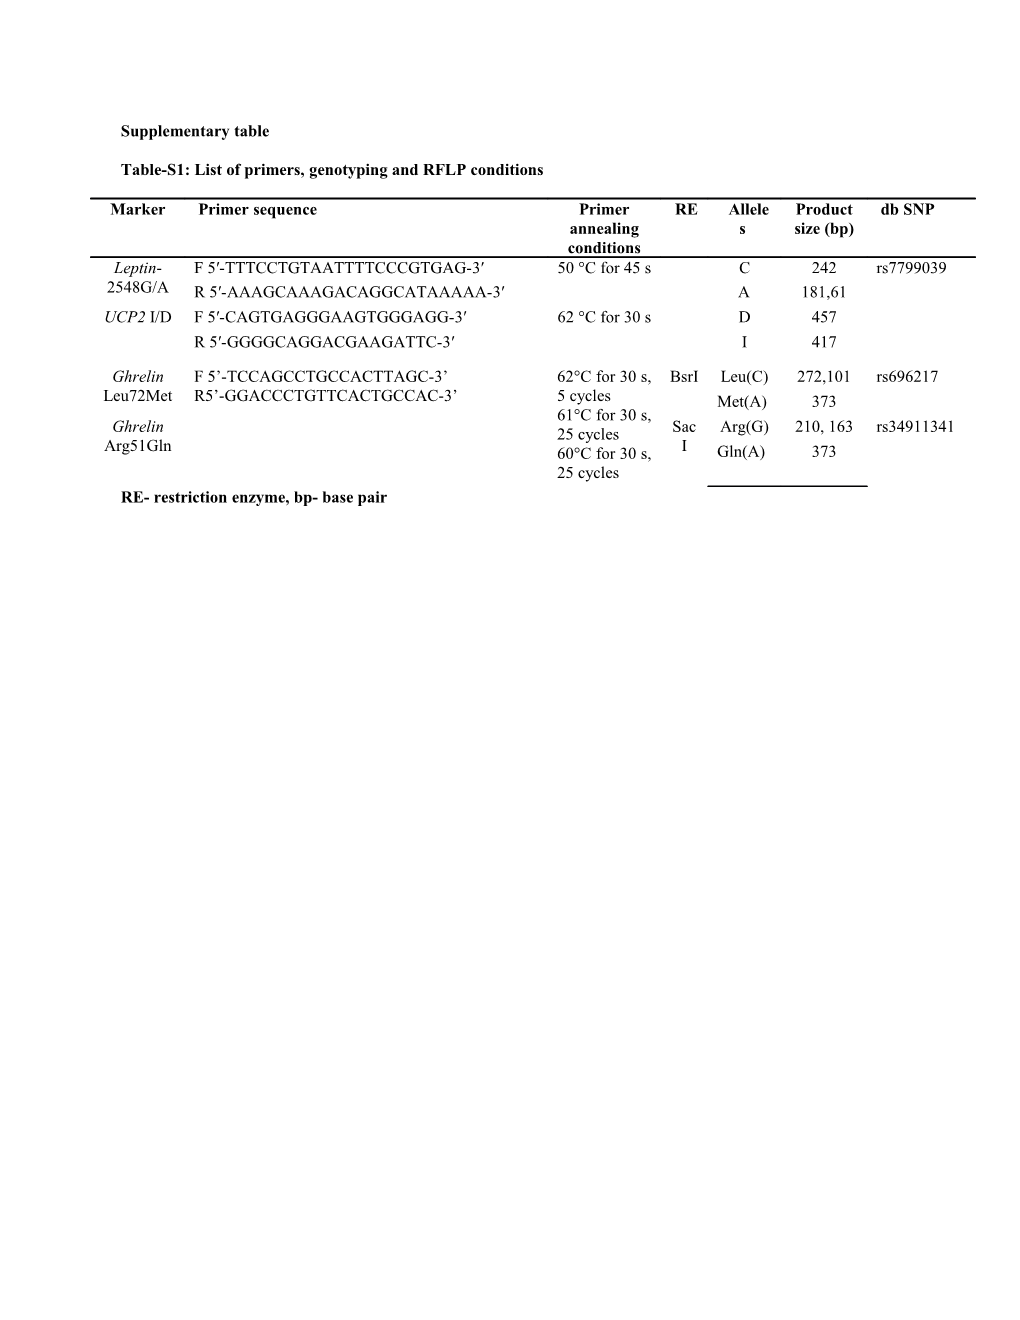 Table-S1: List of Primers, Genotyping and RFLP Conditions